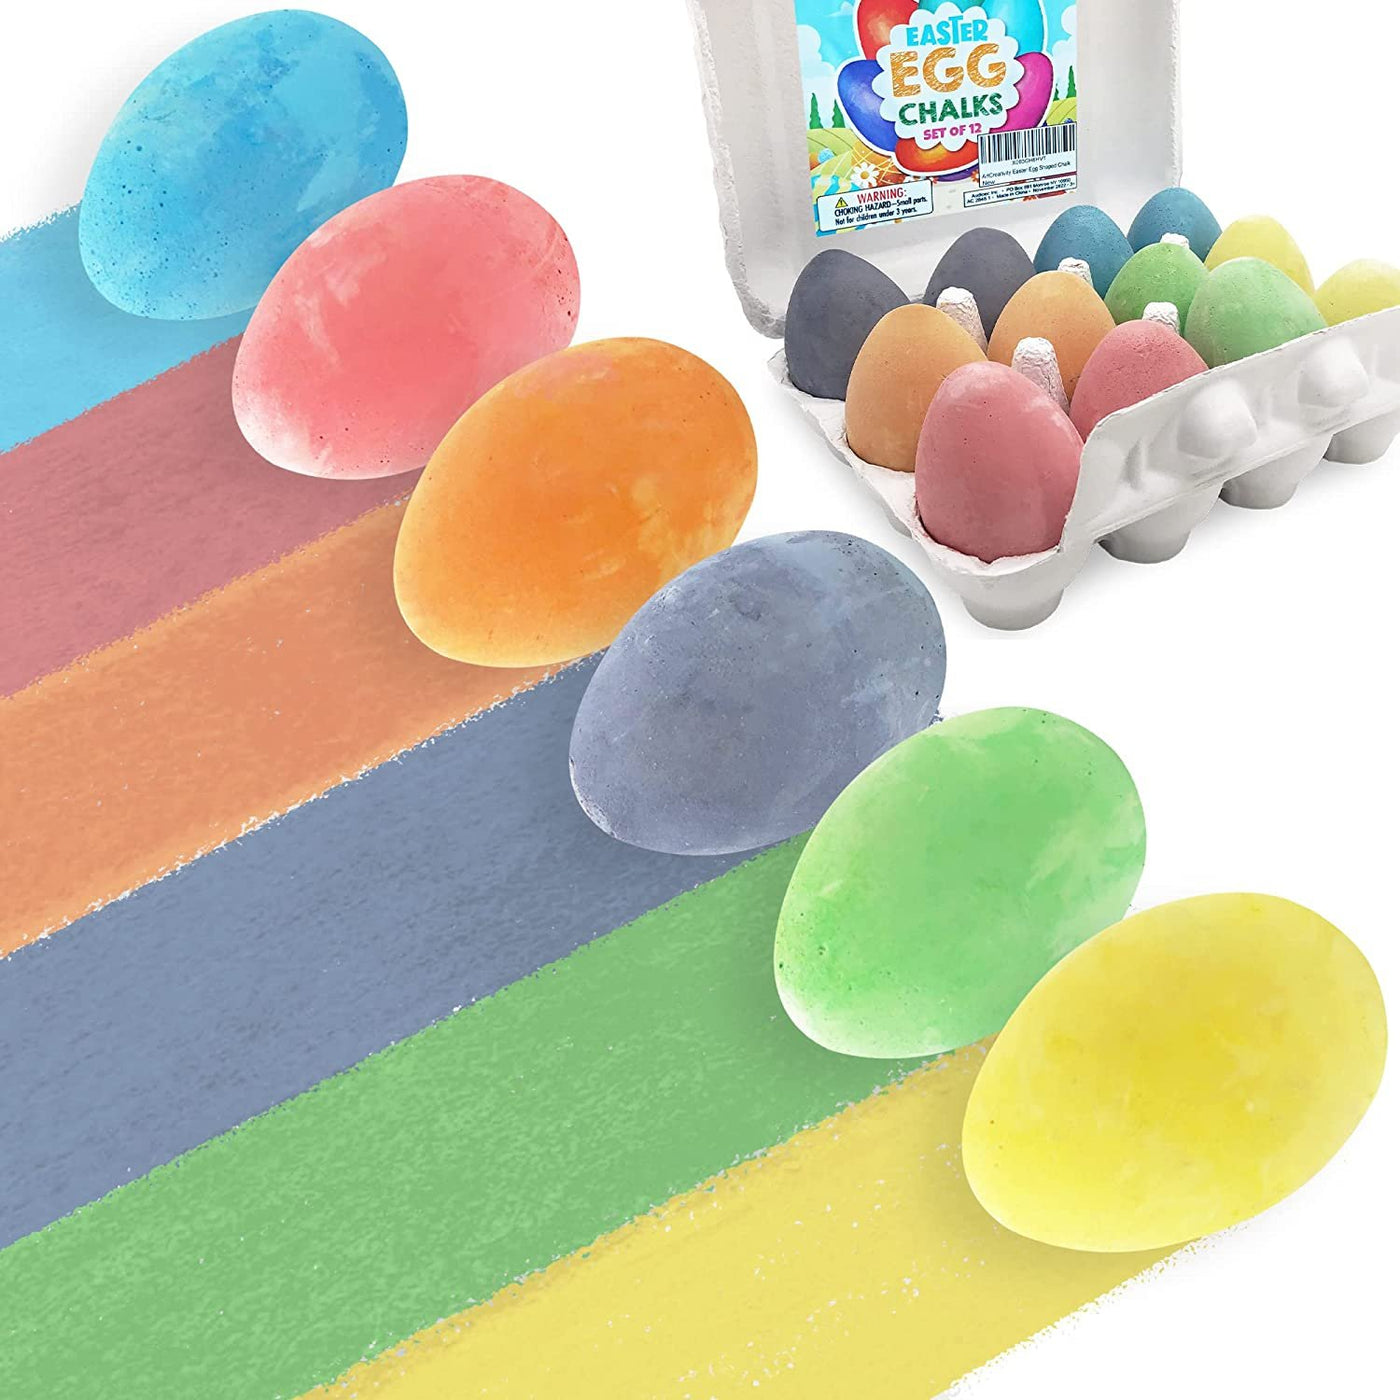 18 Pieces Easter Sidewalk Chalk Set with Easter Colorful Eggs and